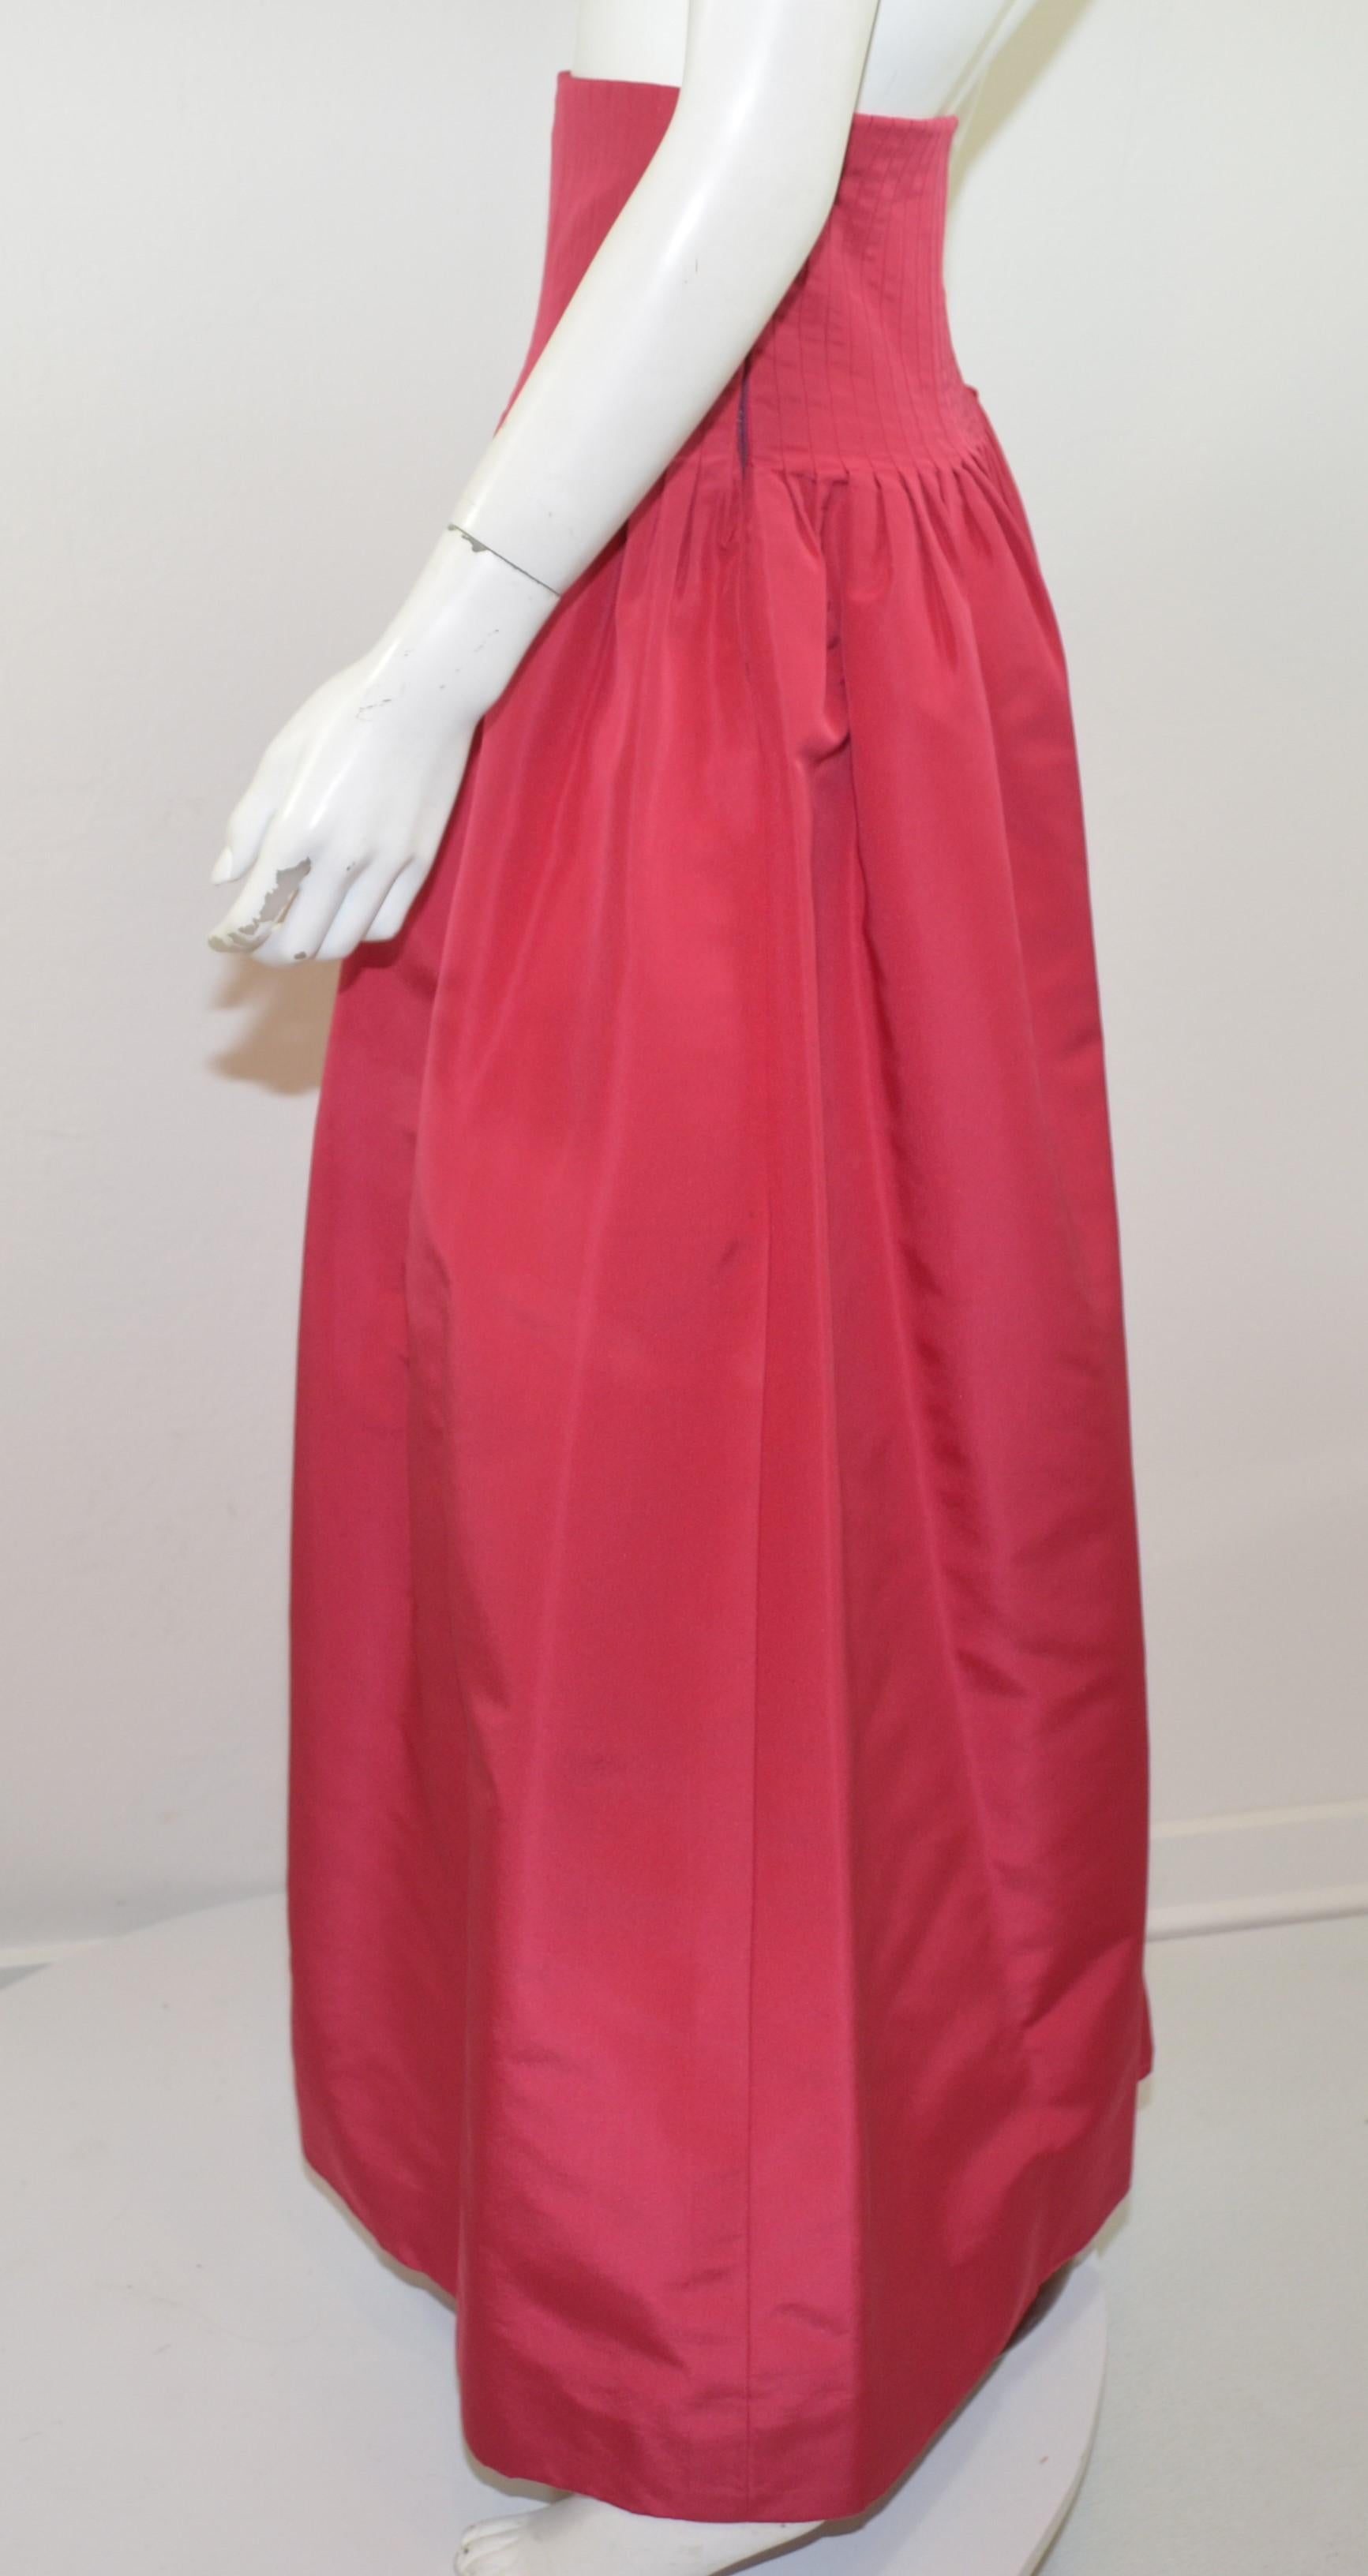 Pierre Cardin Vintage Skirt and Blouse Ensemble In Good Condition For Sale In Carmel, CA